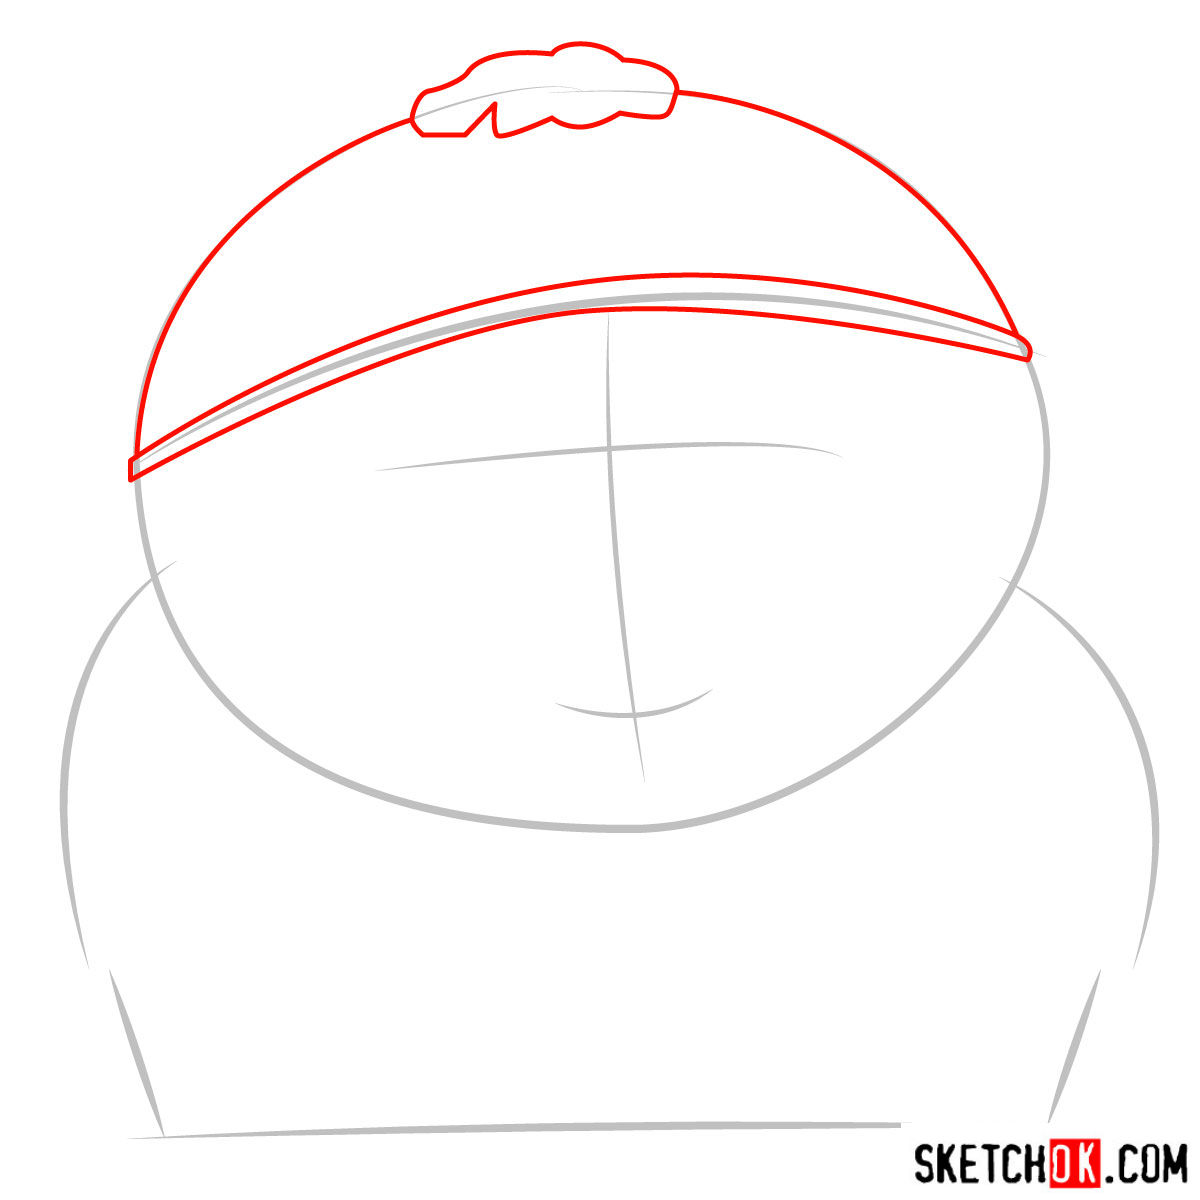 How to draw tricky Cartman from South Park - step 02